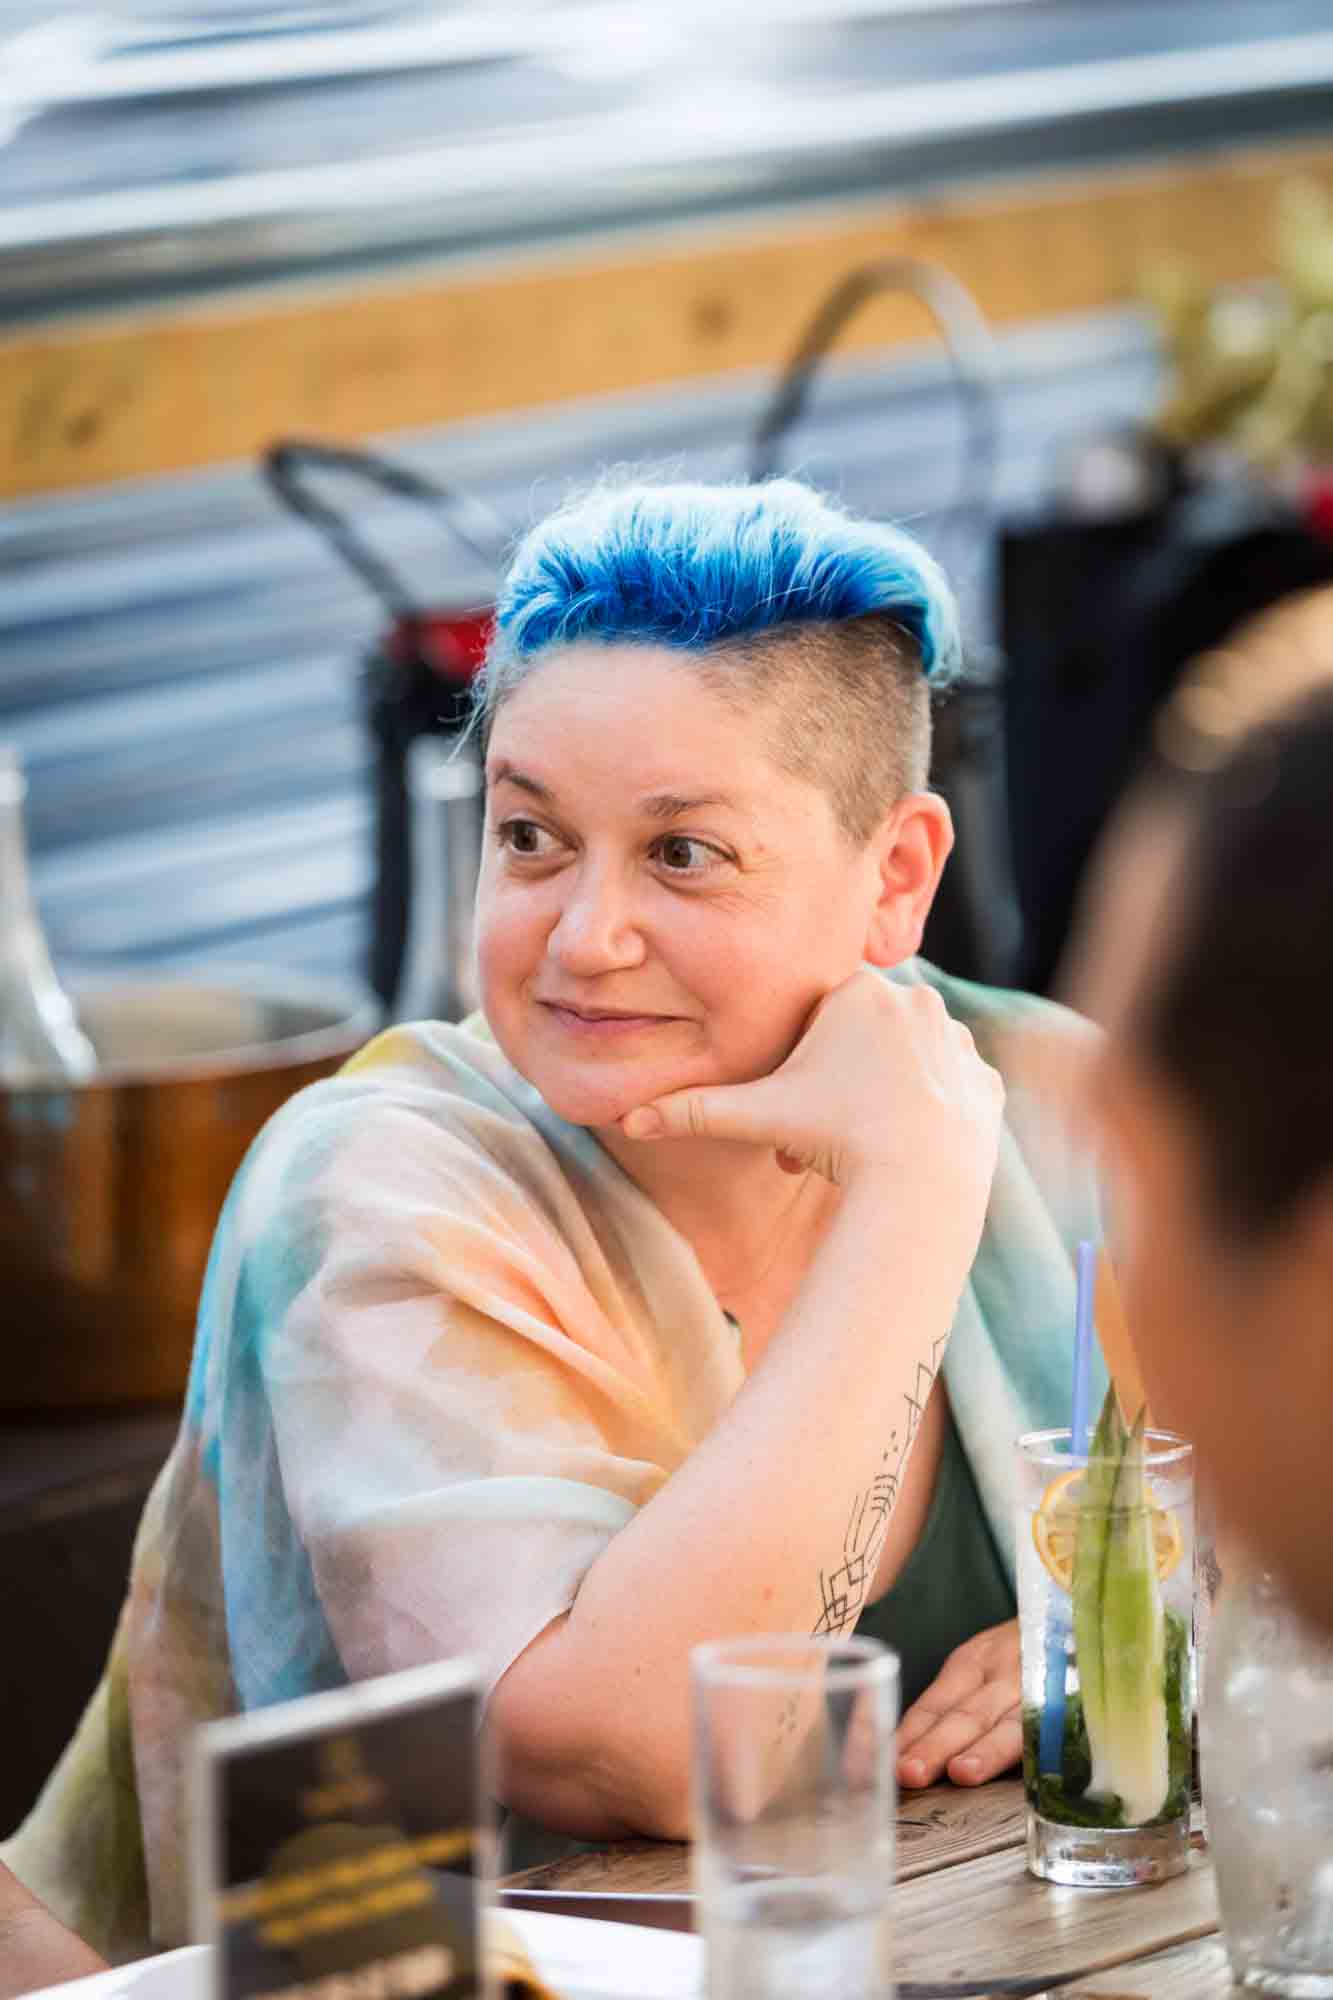 Woman with blue hair and hand to chin during rehearsal dinner at an outdoor restaurant